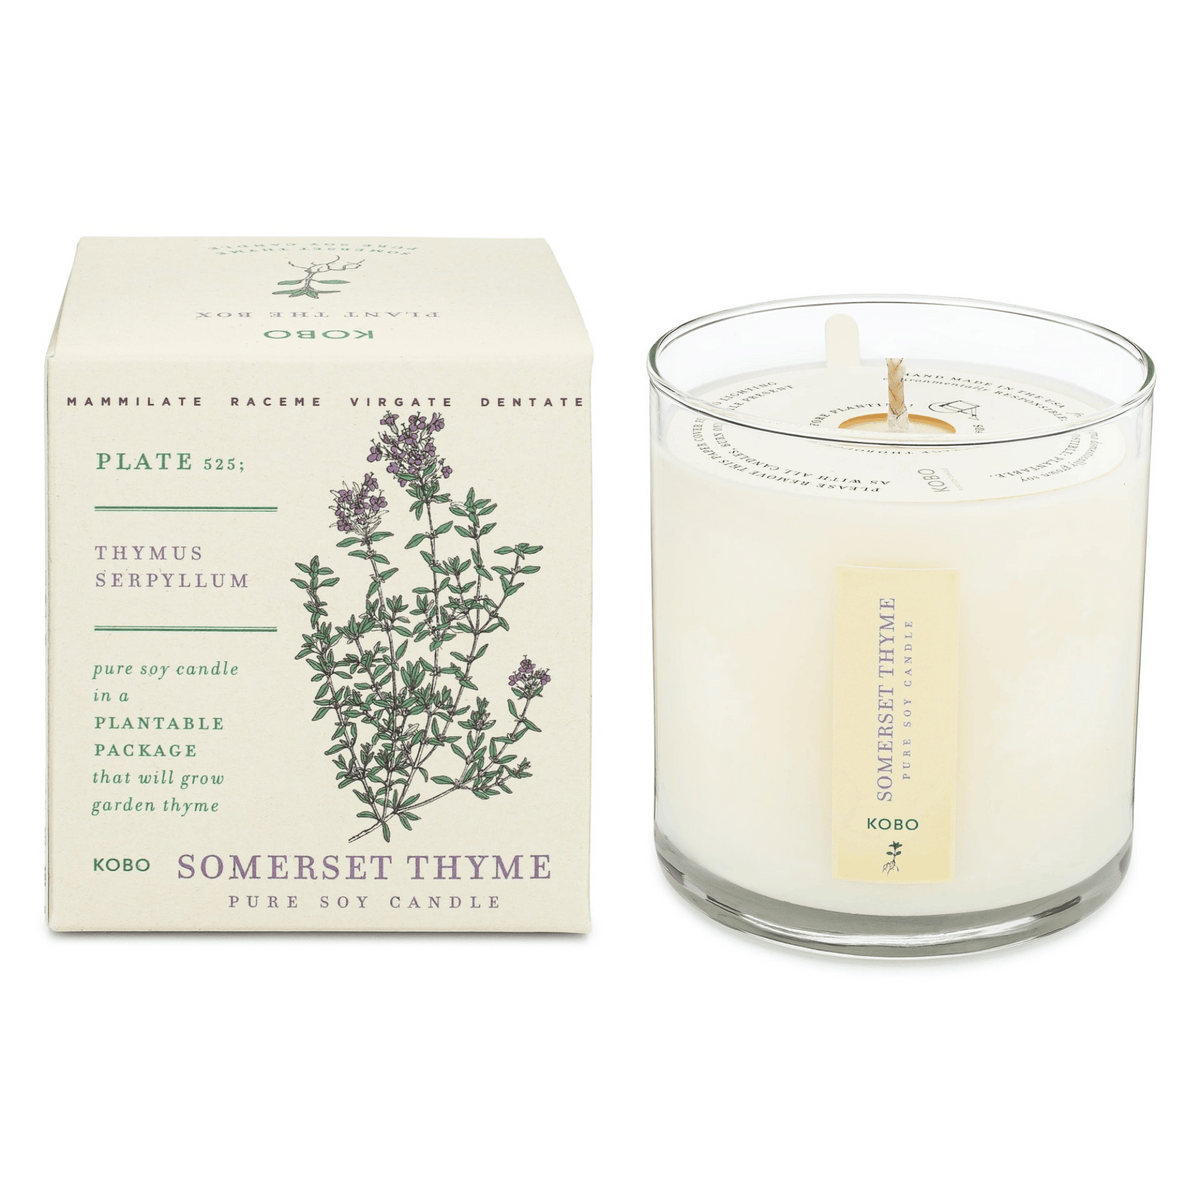 Primary Image of Somerset Thyme Plant the Box Candle